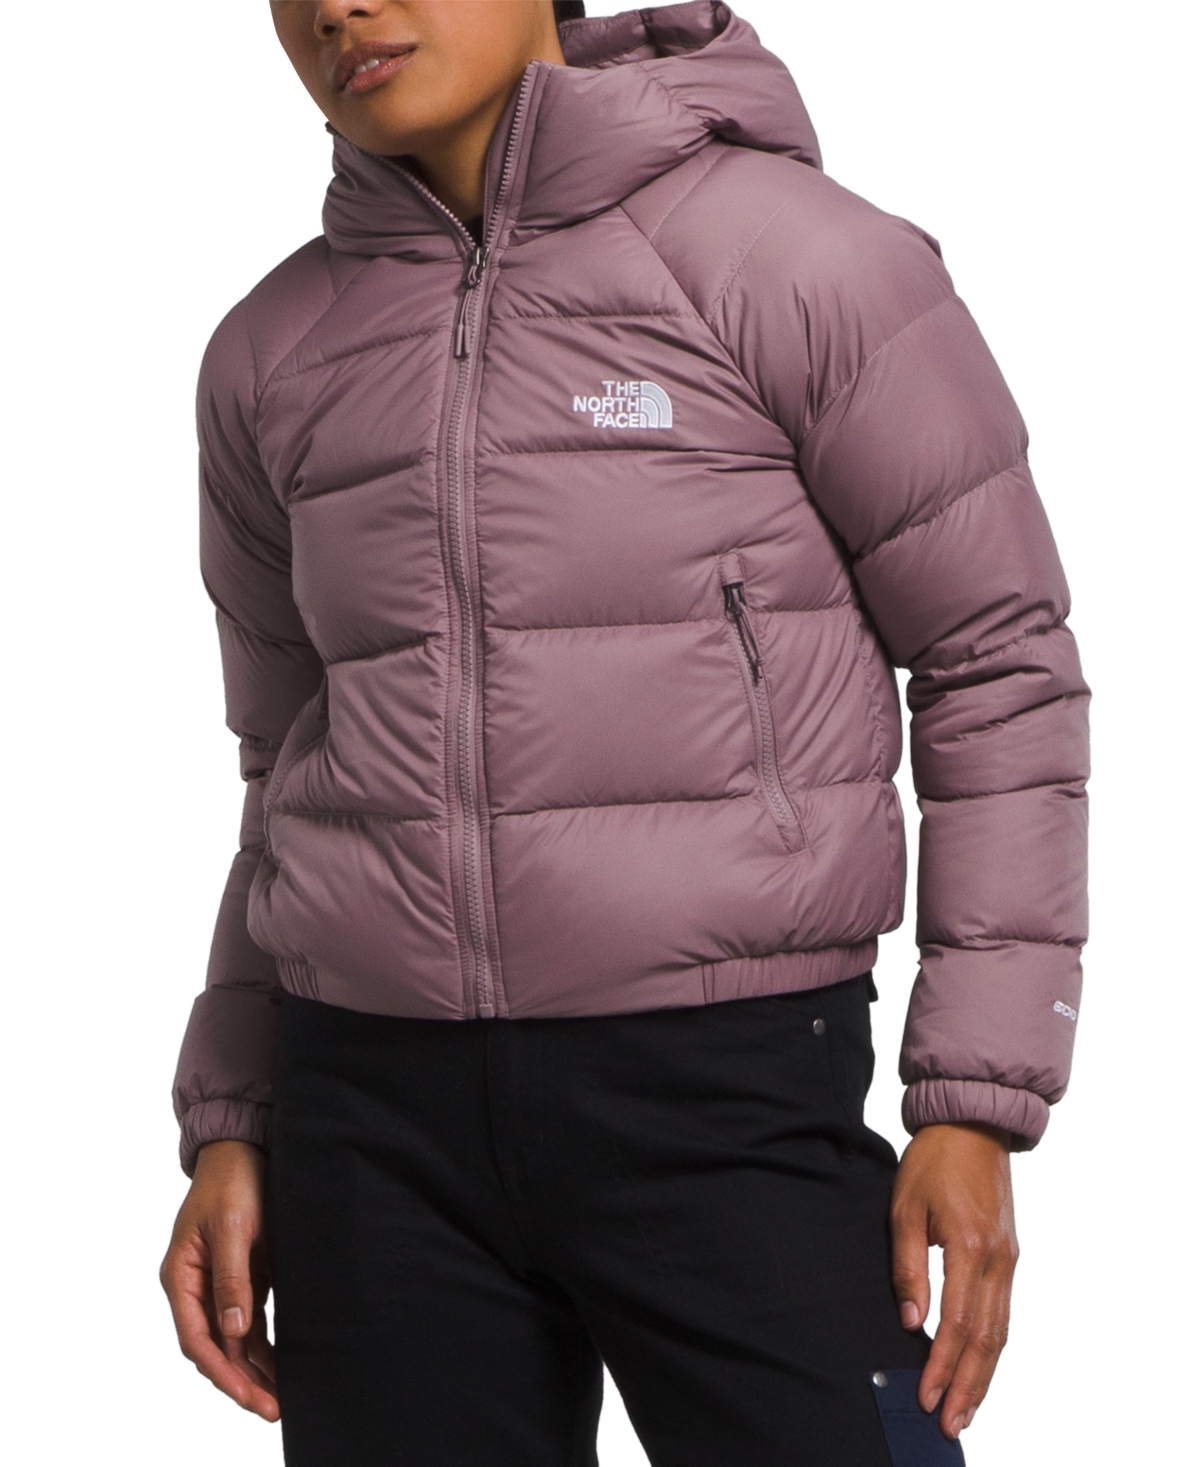 The North Face Women's Hydrenalite Hooded Down Jacket - Boysenberry ...